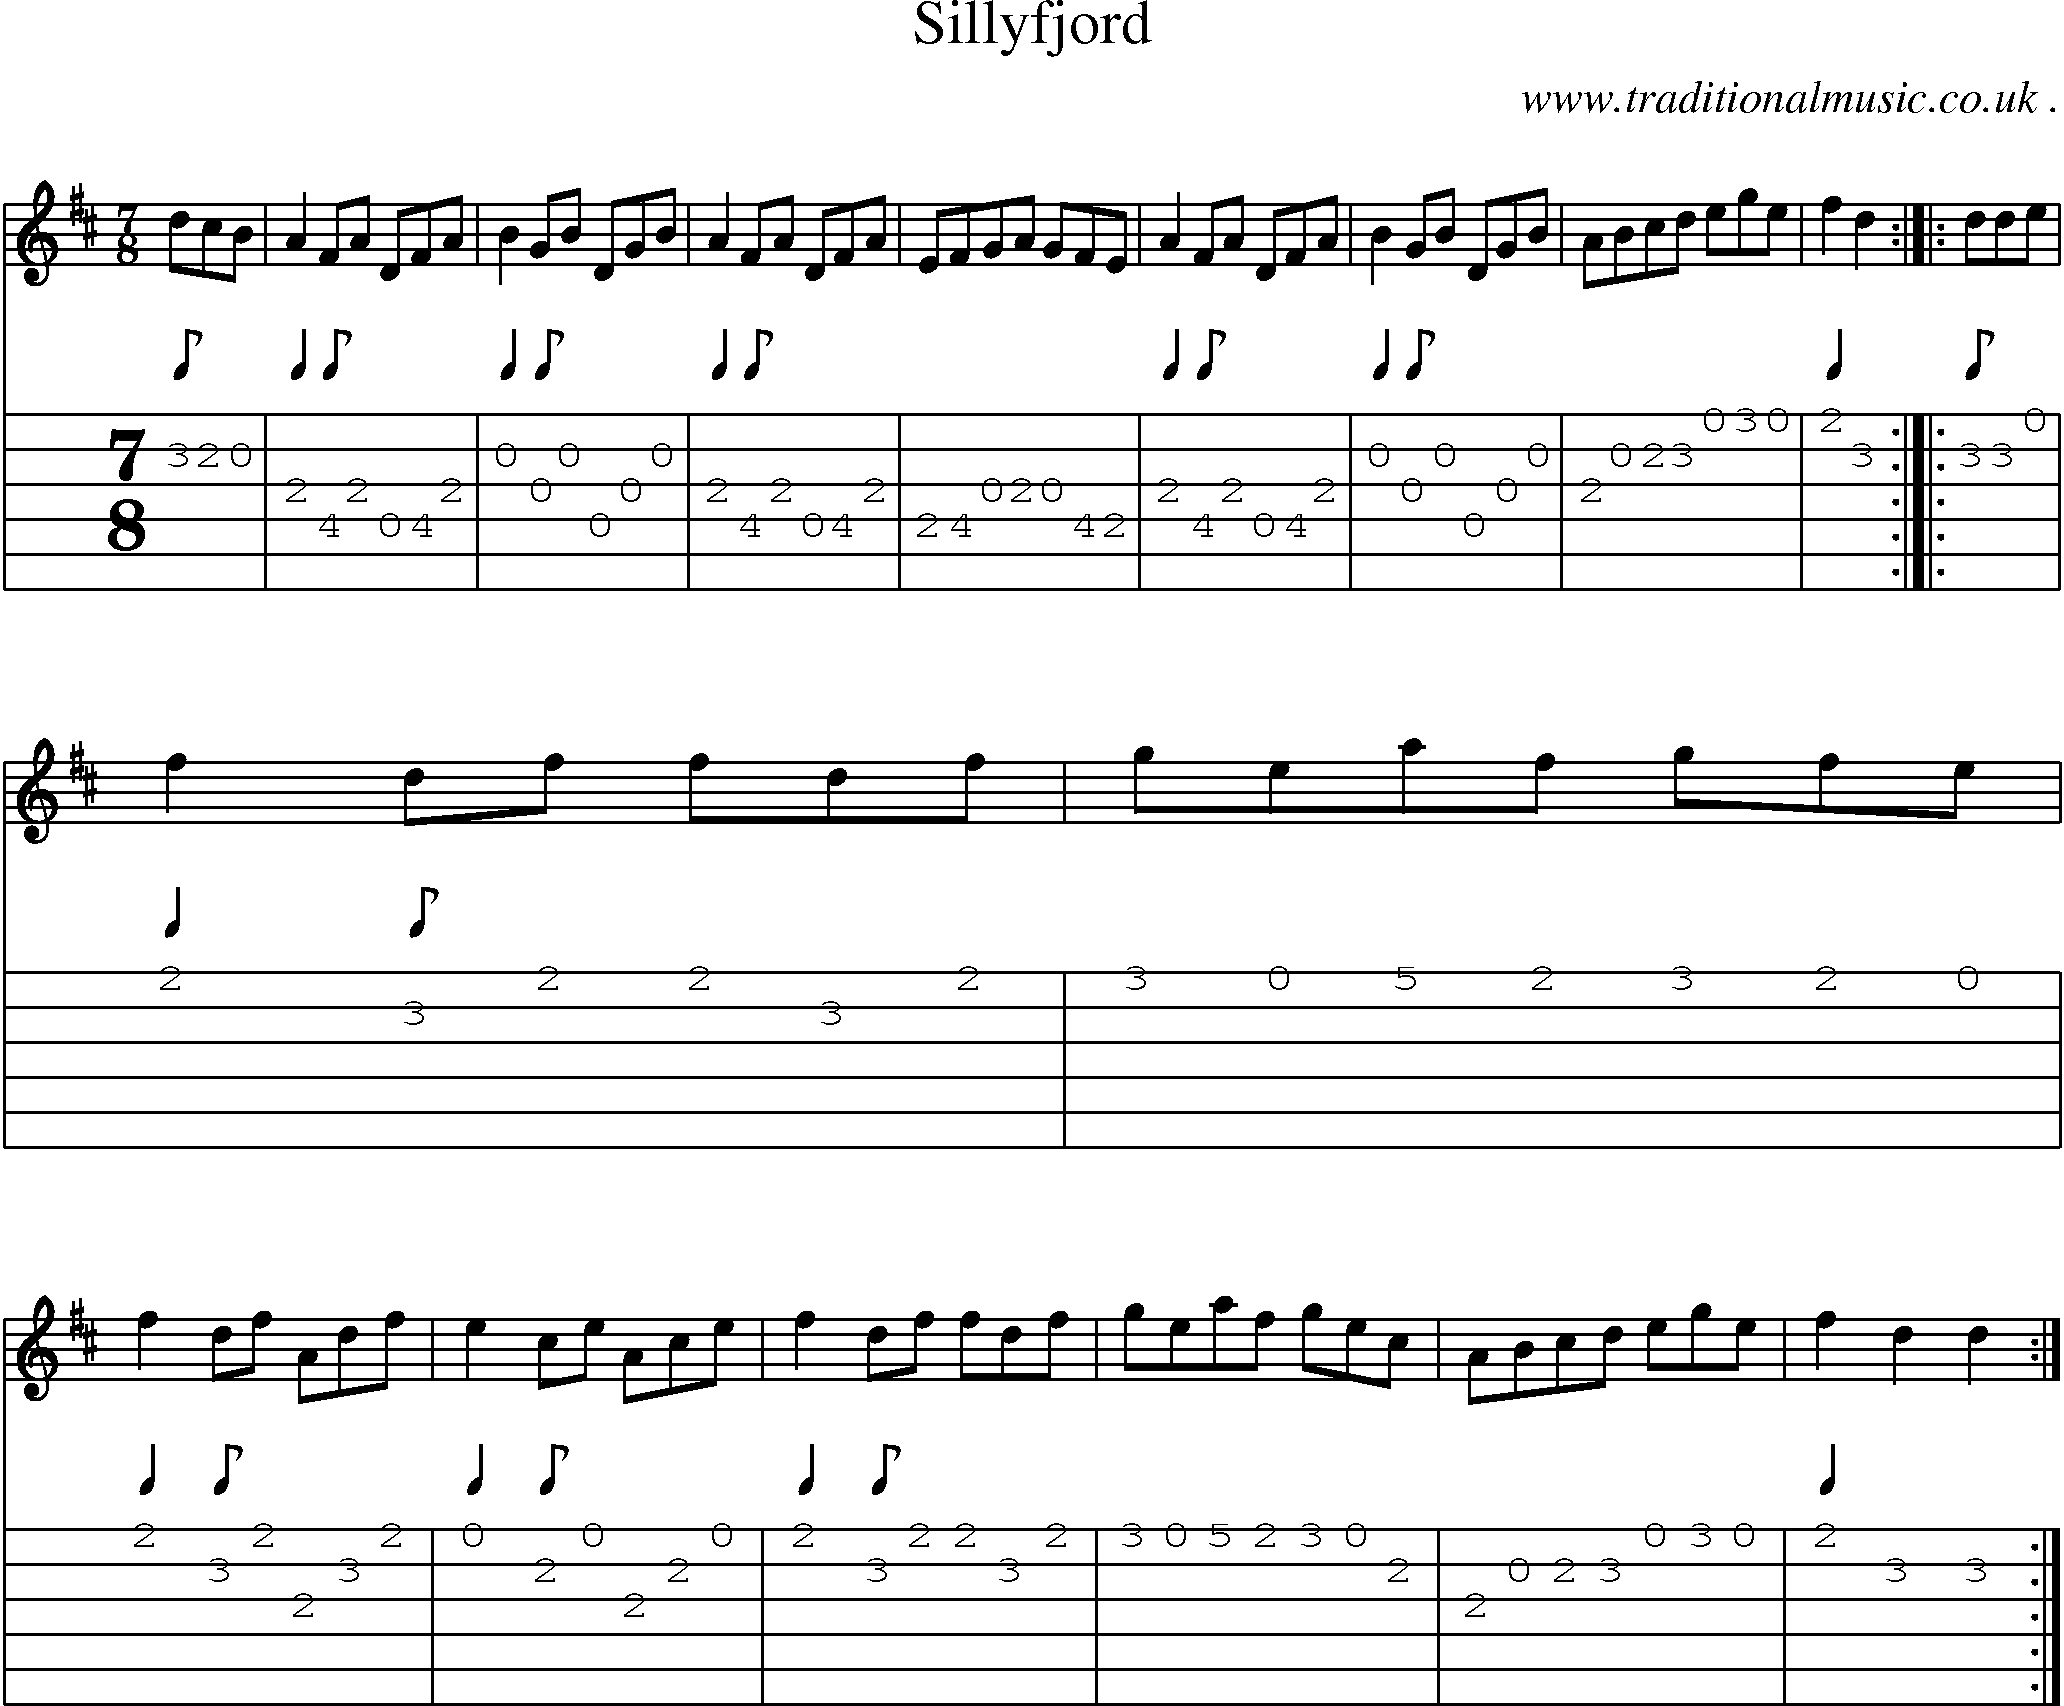 Sheet-Music and Guitar Tabs for Sillyfjord